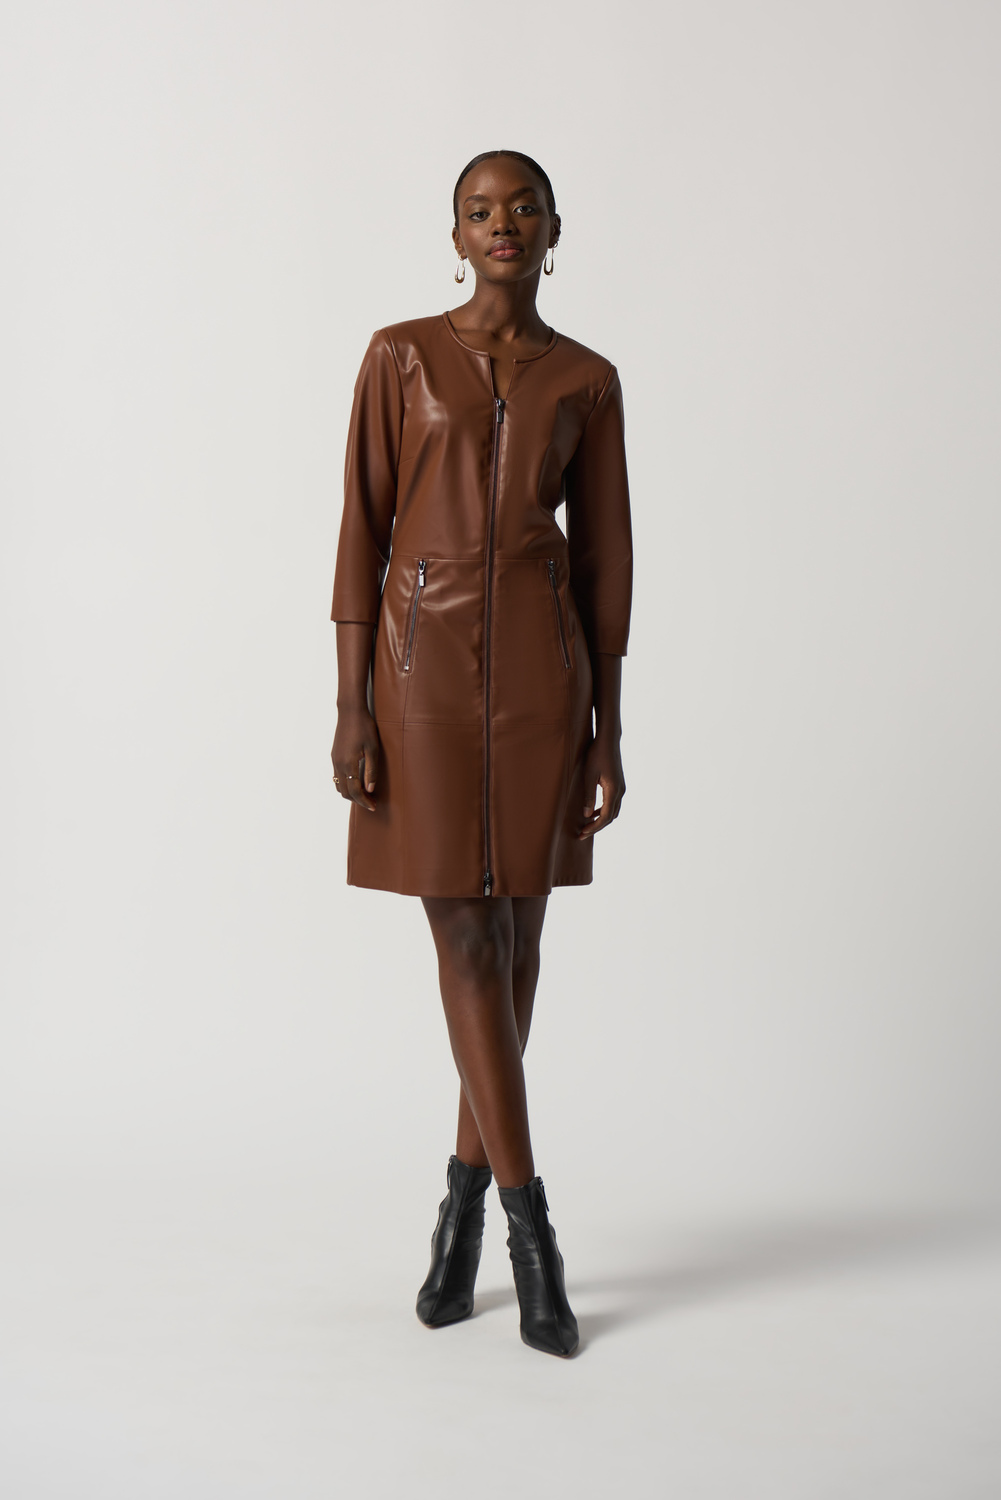 Faux Leather Zip-Up Dress Style 233920. Toffee